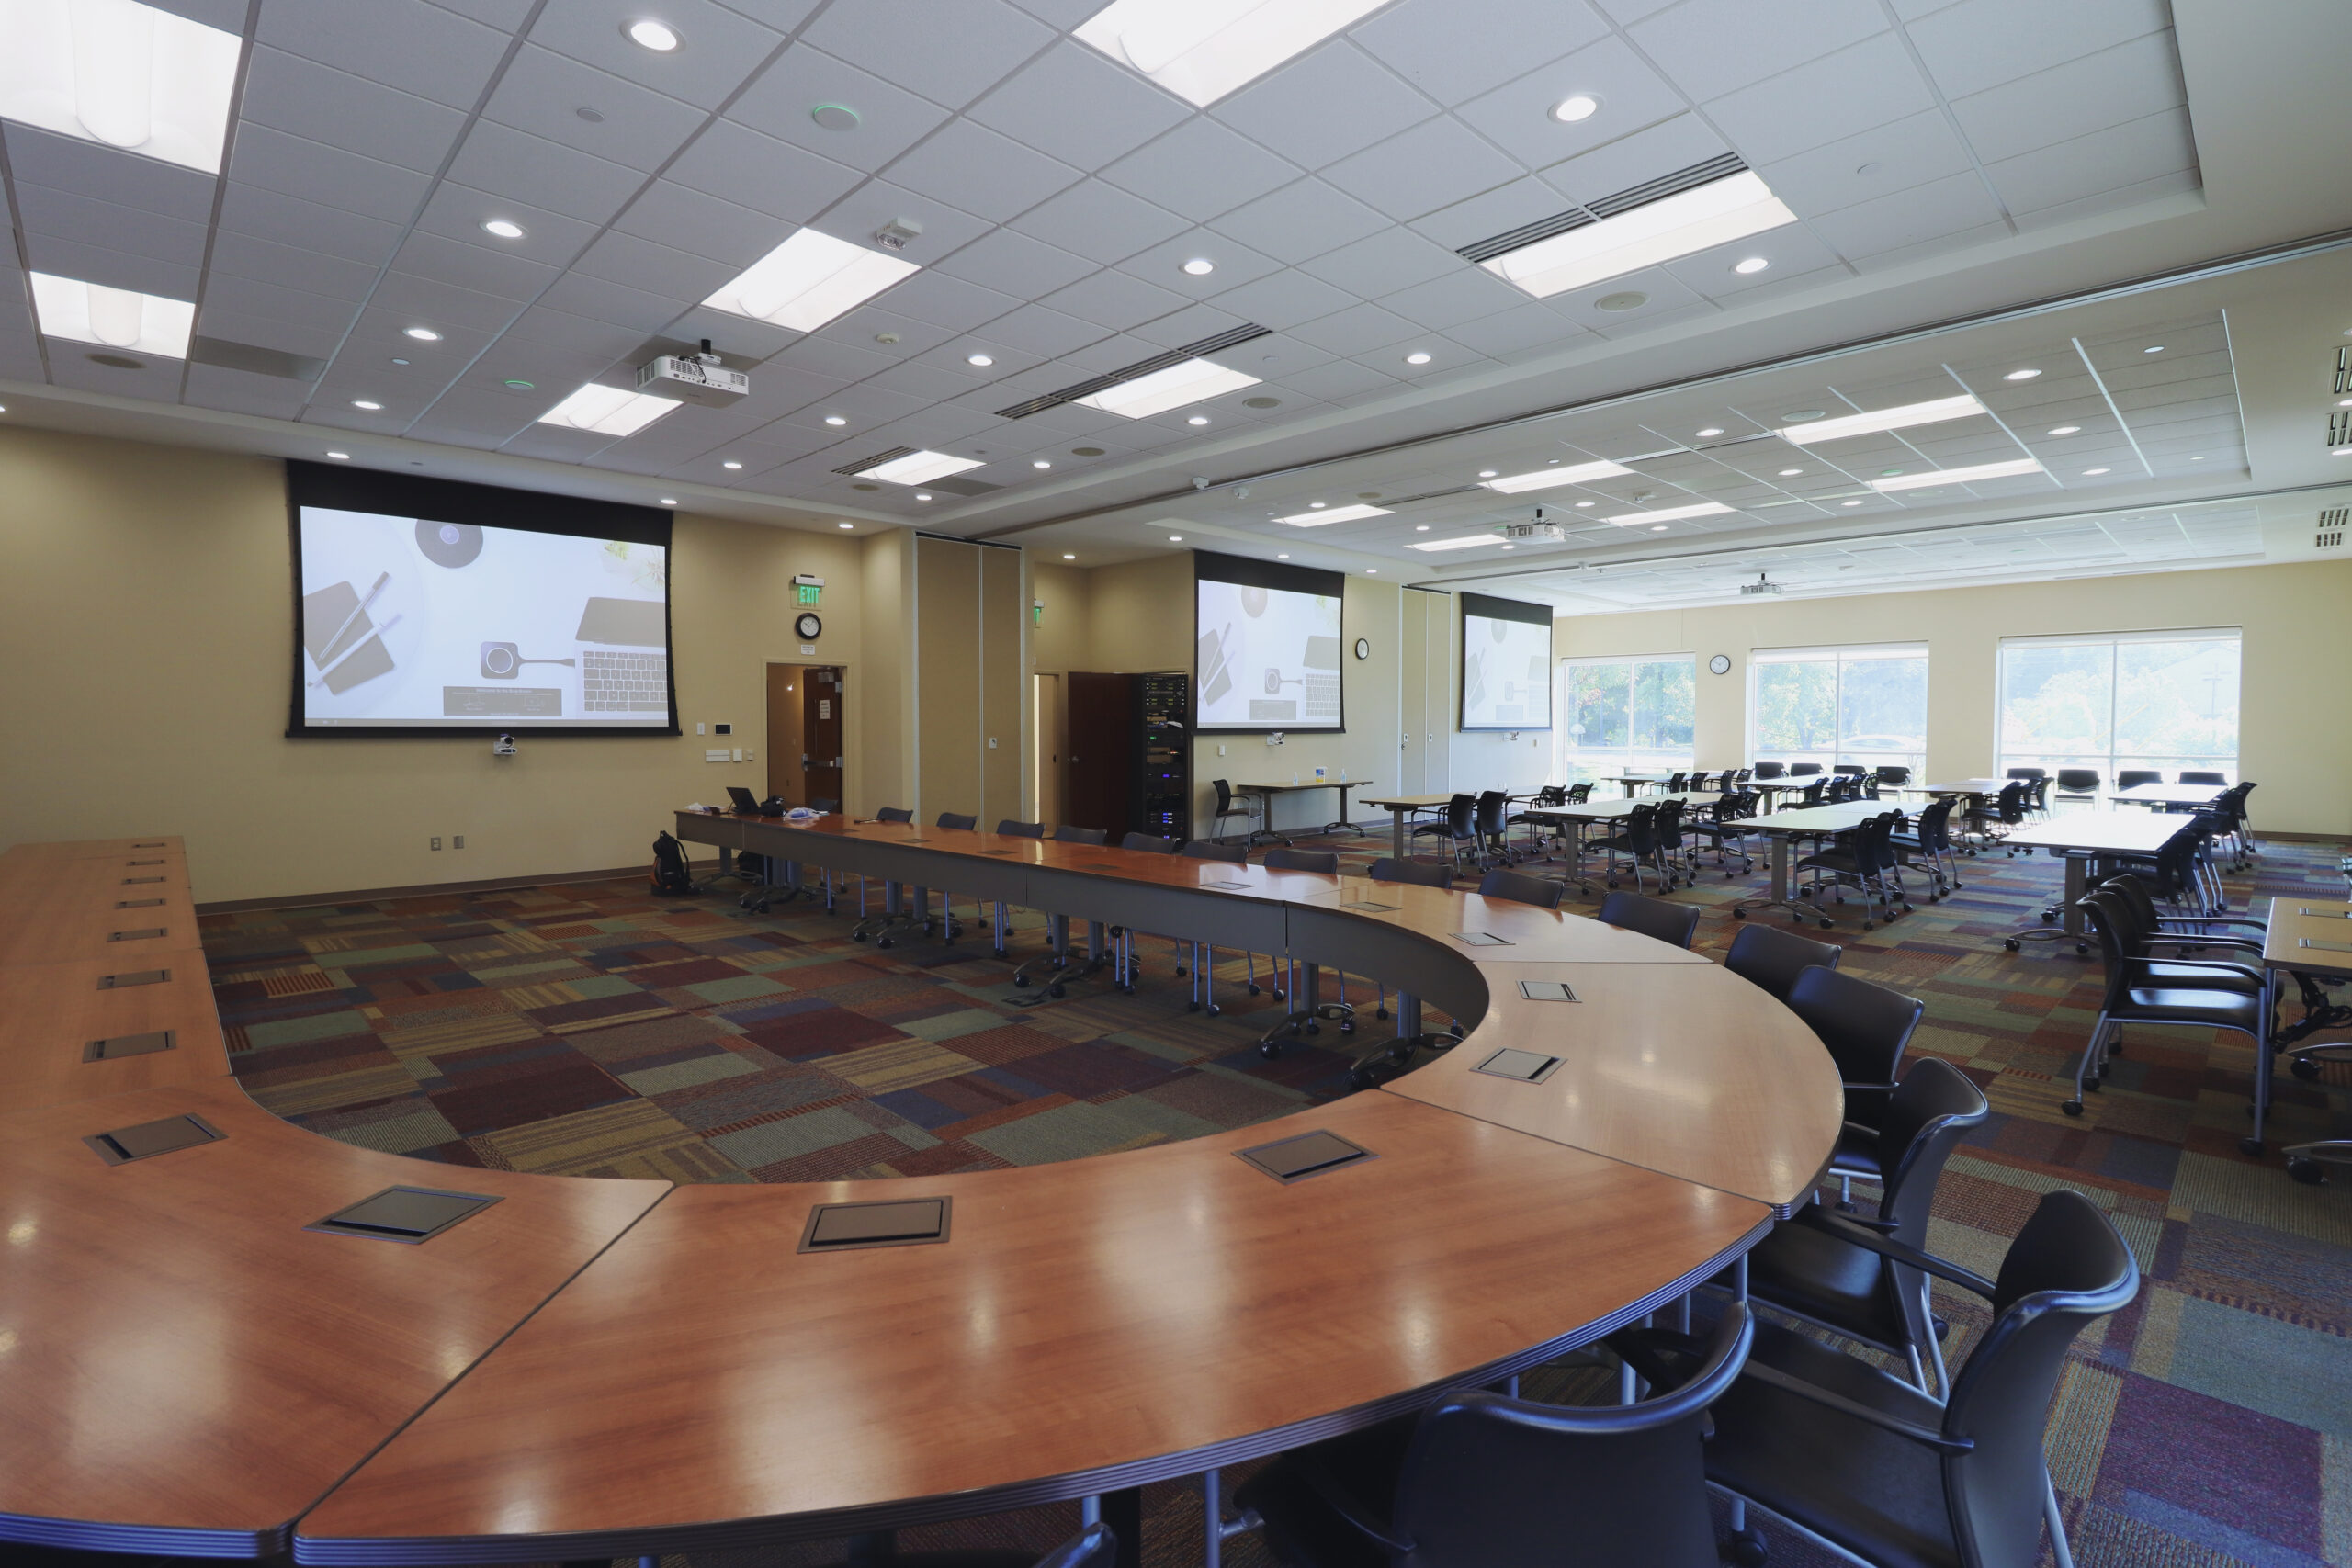 A very large conference space is opened up to show that all 3 rooms can be combined into one space and system. We are sitting on the Boardroom side looking over the table towards the other 2 spaces